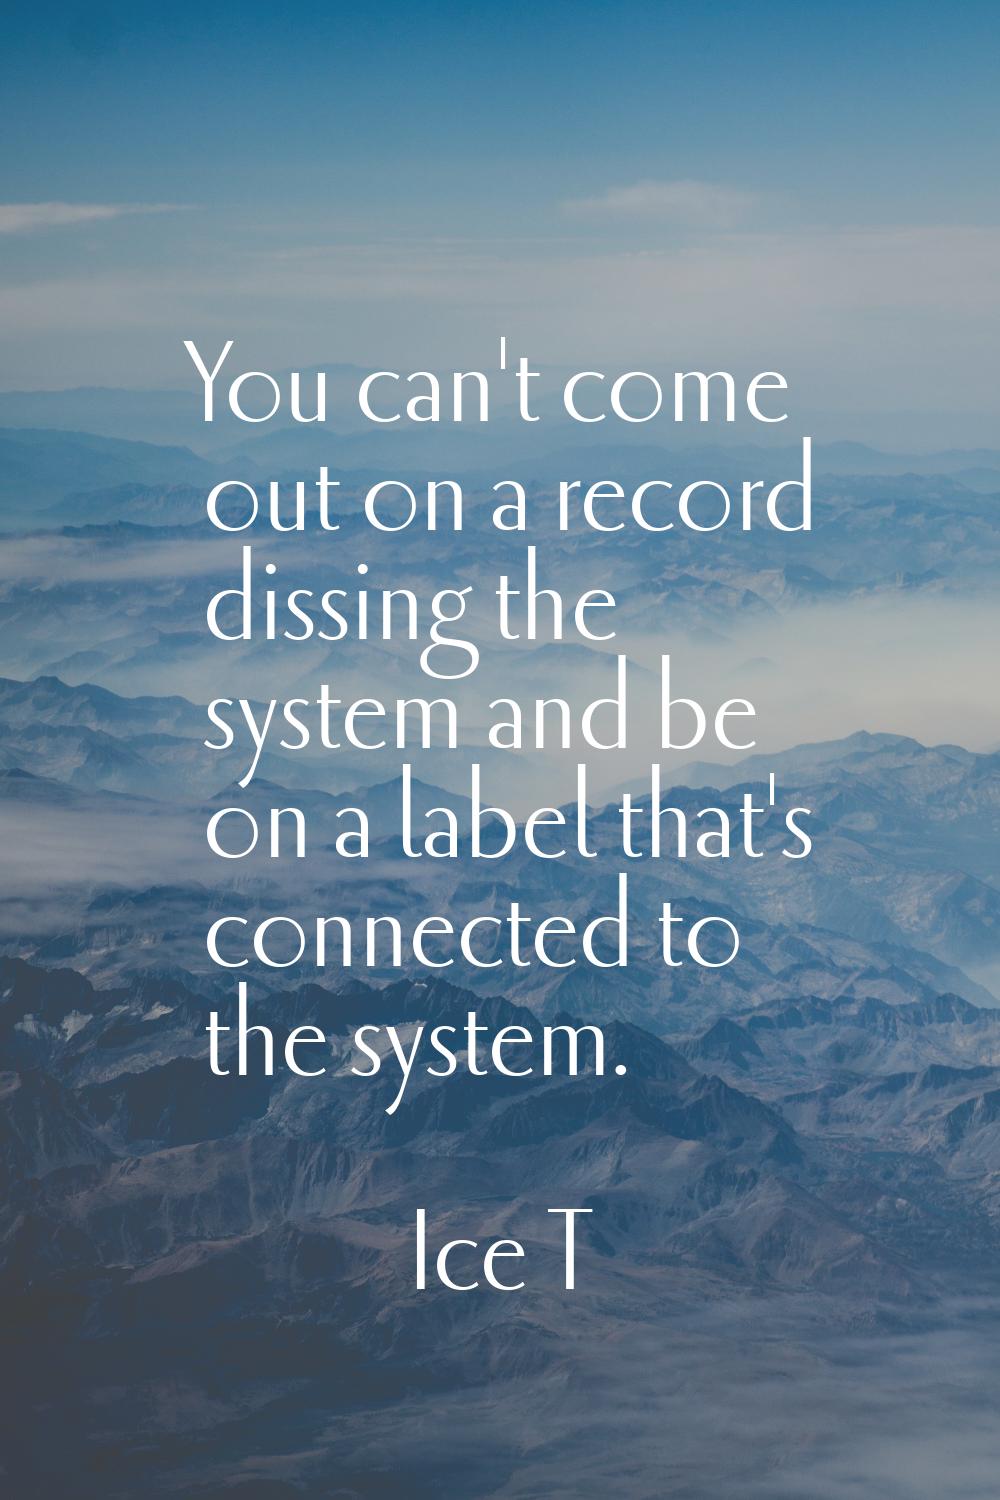 You can't come out on a record dissing the system and be on a label that's connected to the system.